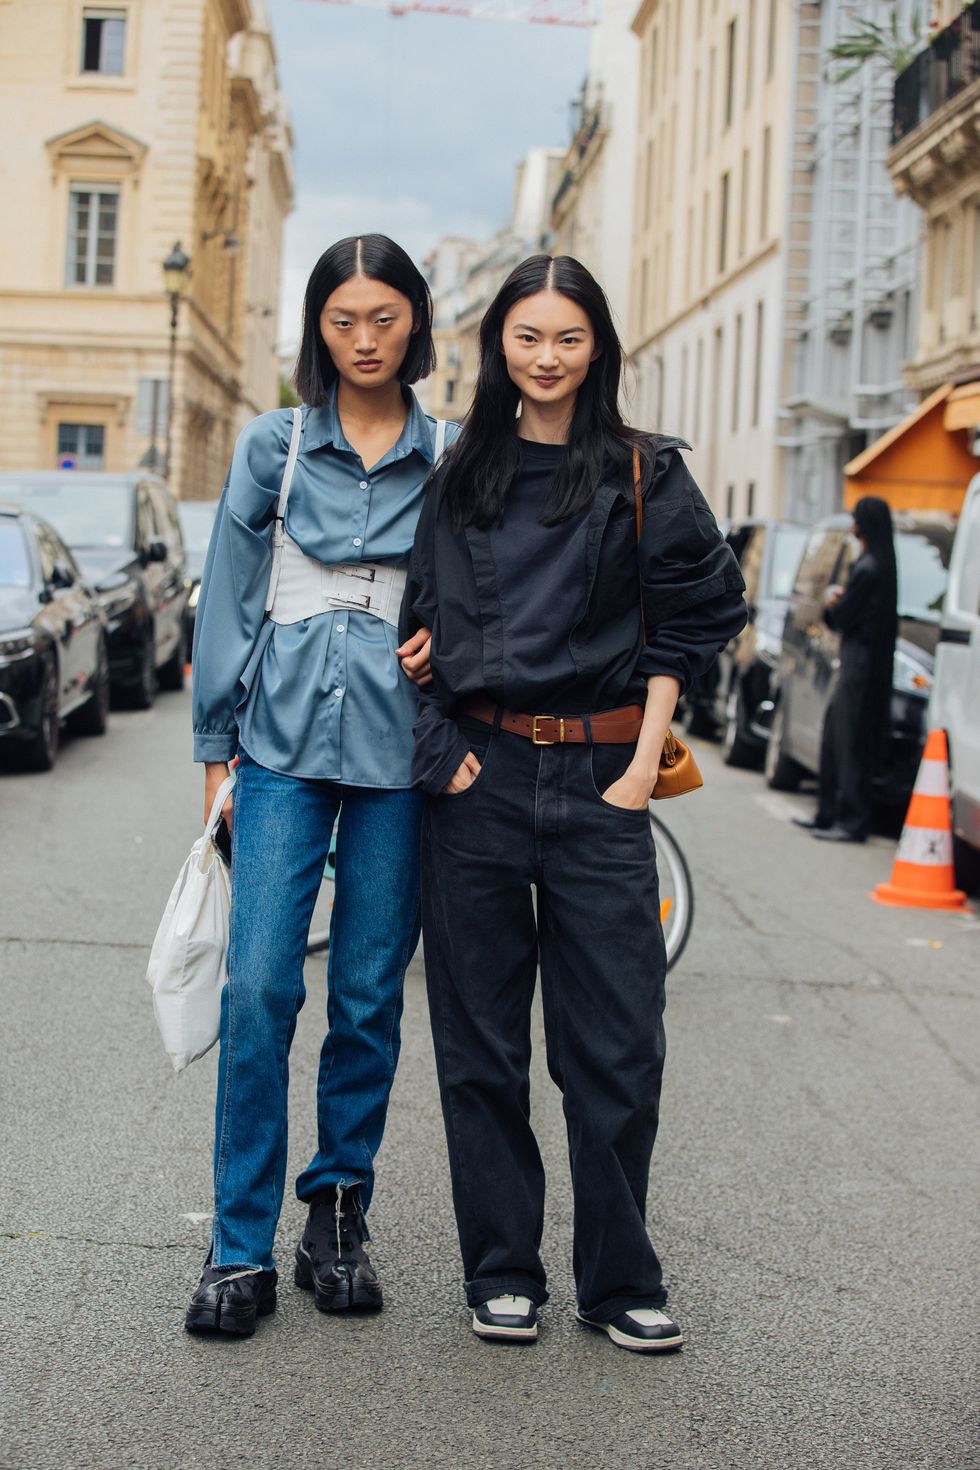 paris, france july 07 chinese models yilan hua and he cong at the fendi show at palais brongniart during couture fashion week fallwinter 2022 on july 07, 2022 in paris, france yilan l wears a blue shirt with a with harness, blue jeans, and black reebok maison margiela tabi instapump fury oxford shoes he cong r wears a black shirt with front folds, brown belt, boxy blue jeans, and nike sneakers photo by melodie jenggetty images